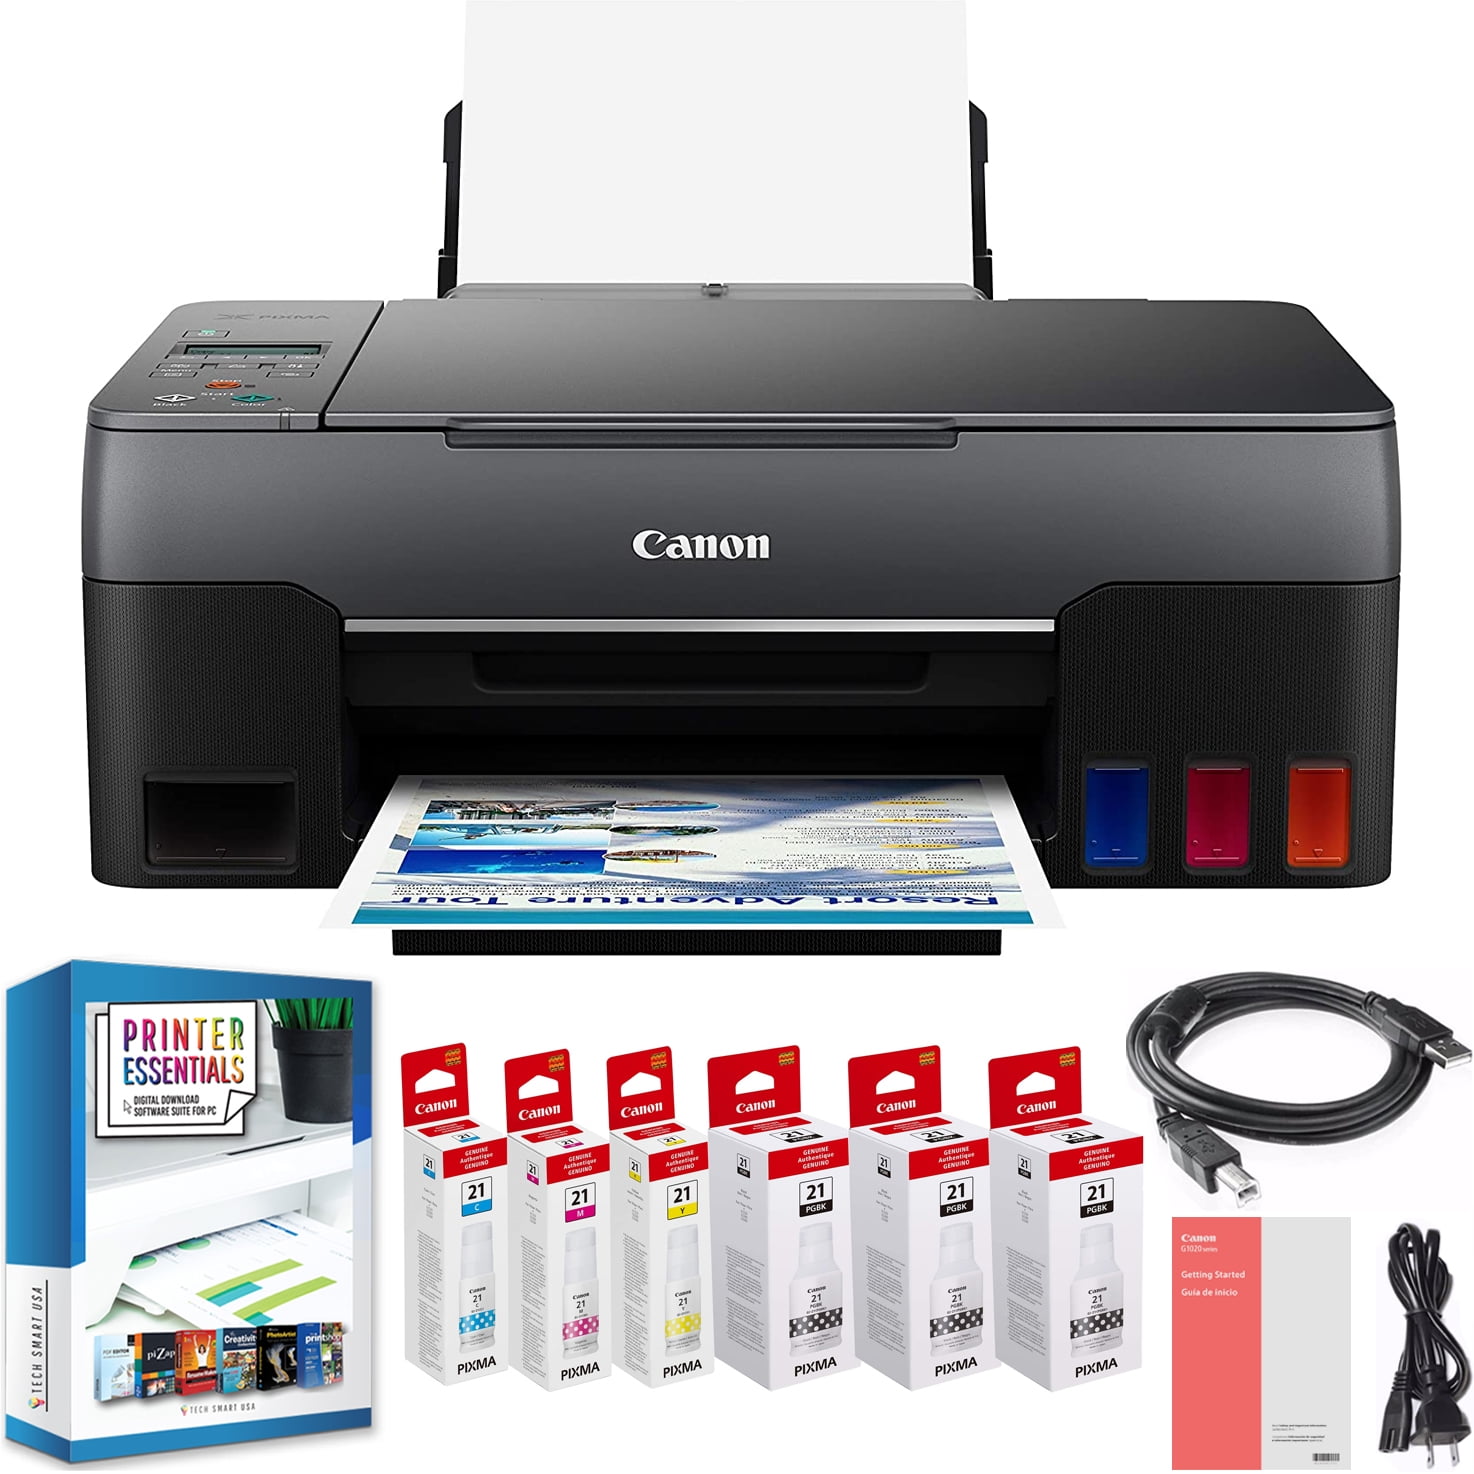 Canon Pixma G3260 All-in-One Wireless MegaTank Printer with Copy, Scan,  Photo, Mobile Print 4468C002 and High Yield Refillable Tanks, Ink Set + 2  Extra Black Bundle with DGE USB Cable + Software